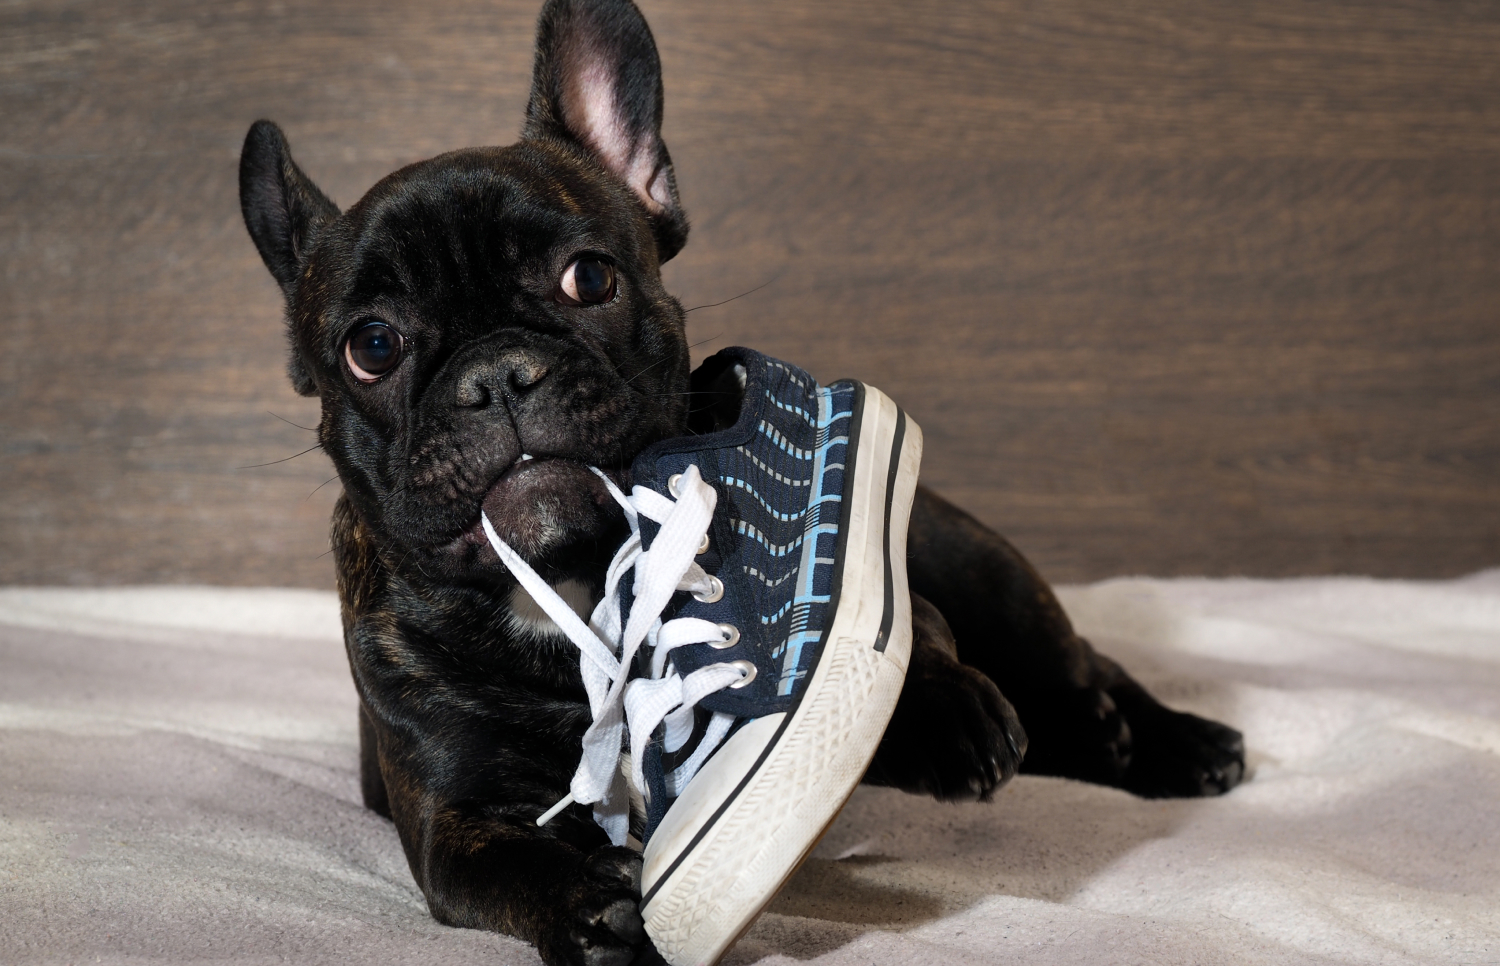 Dog Chewing Shoes? How To Stop Destructive Chewing